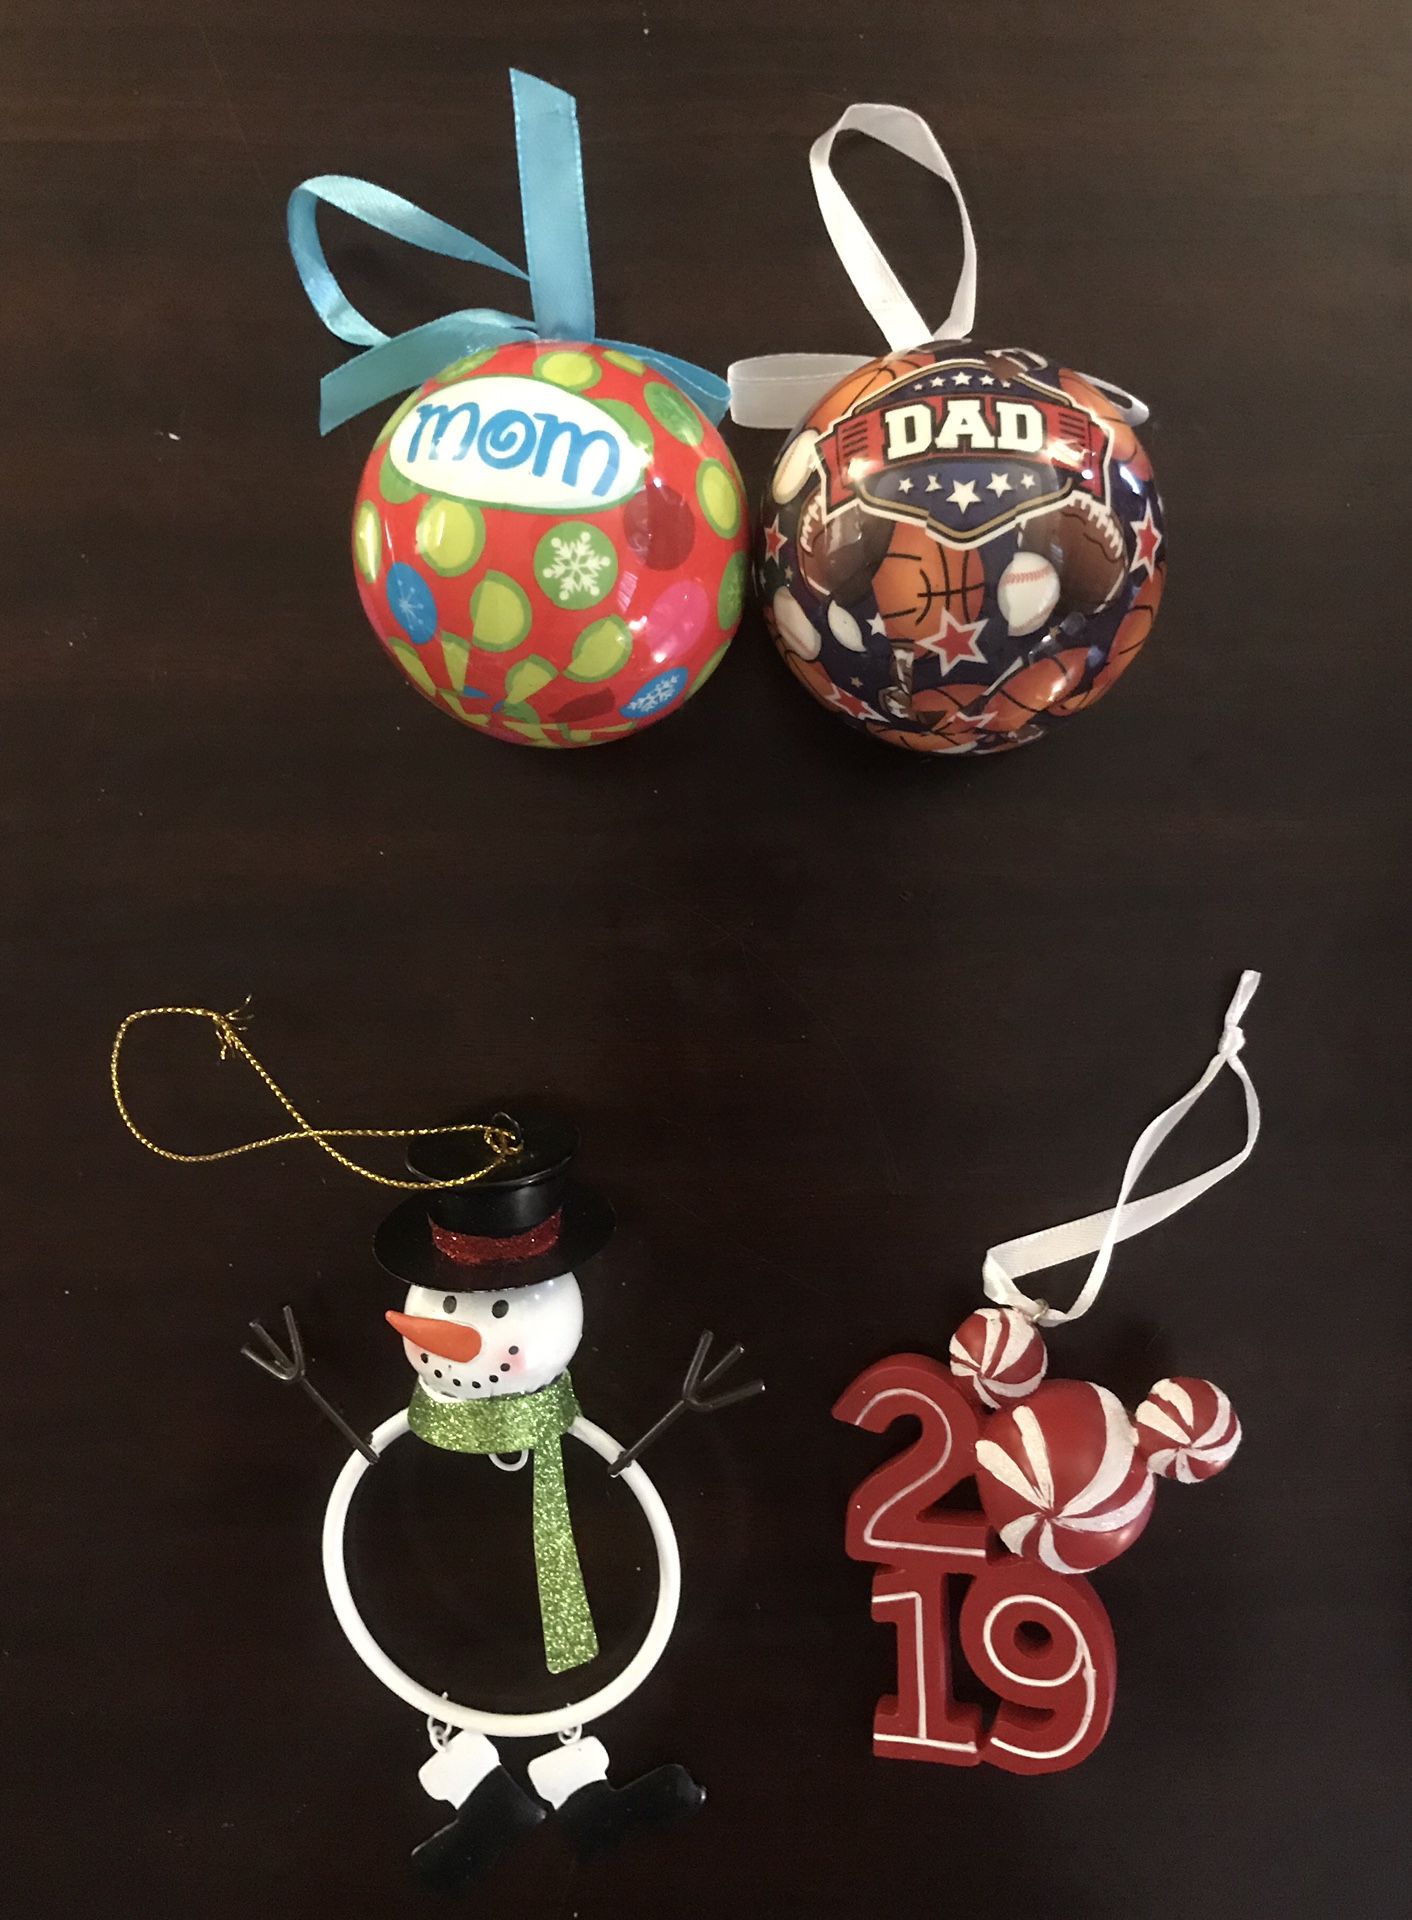 Christmas ornaments: mom, dad, snowman and 2019